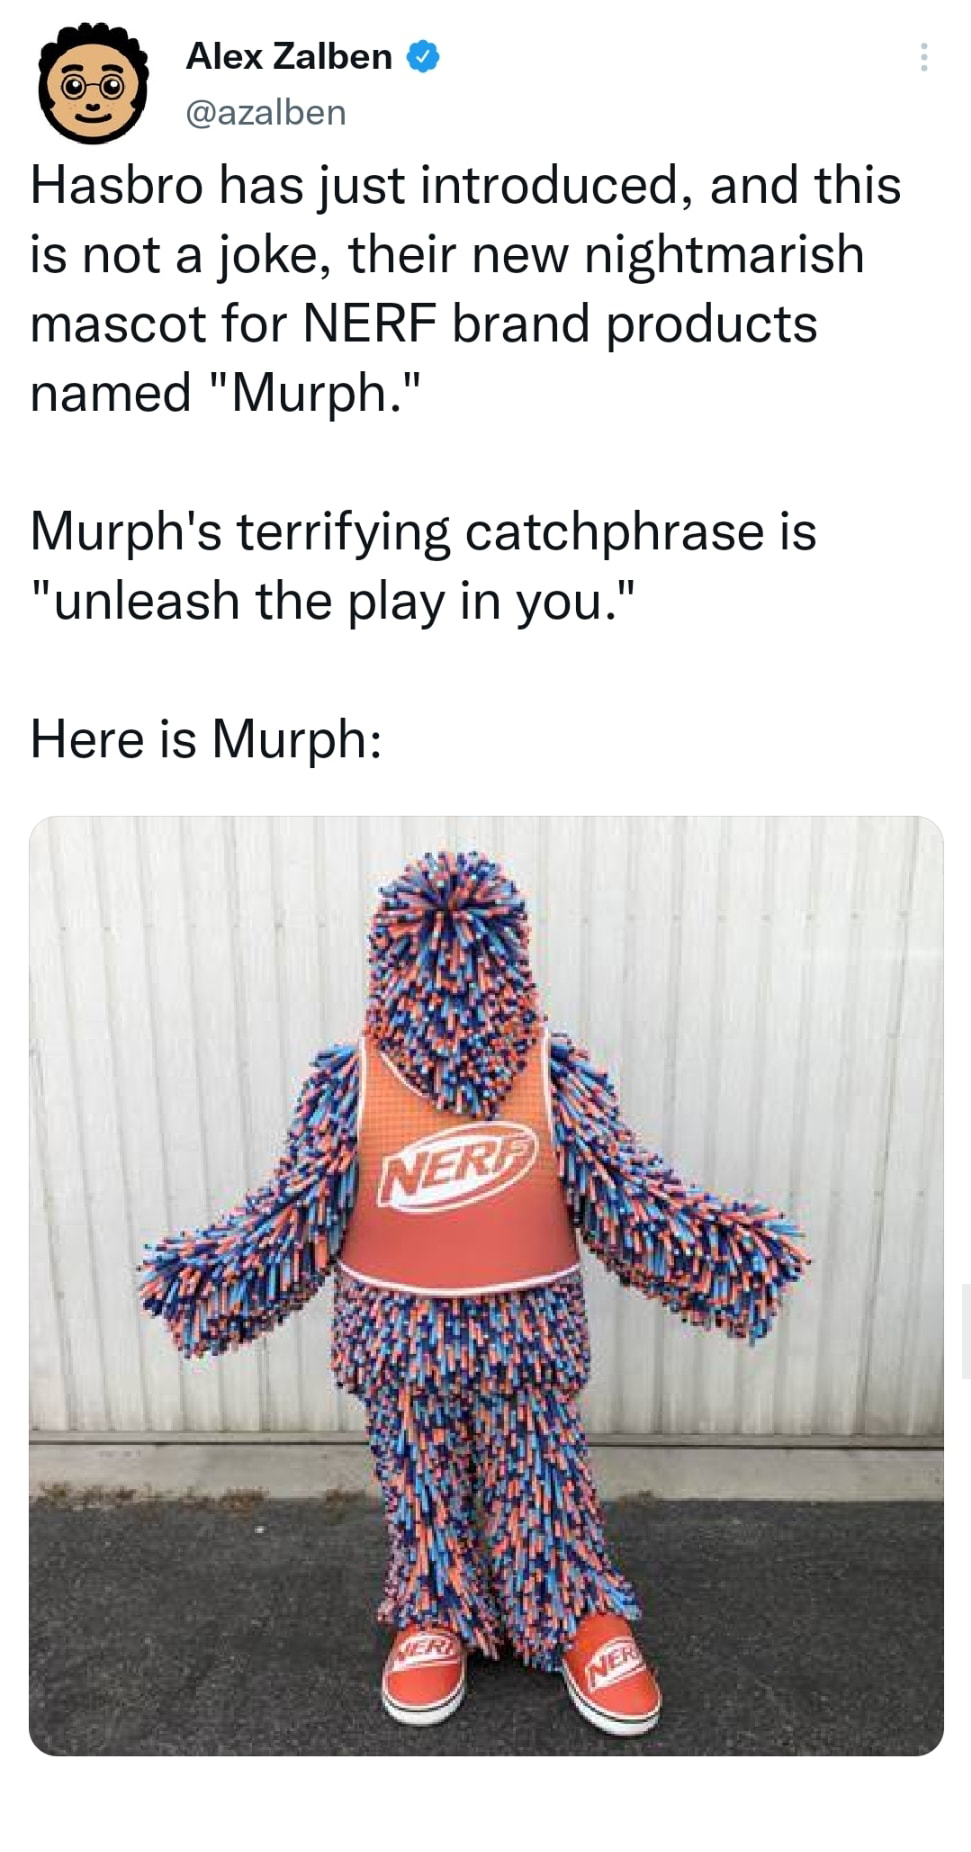 dank memes - murph nerf mascot - Alex Zalben Hasbro has just introduced, and this is not a joke, their new nightmarish mascot for Nerf brand products named "Murph." Murph's terrifying catchphrase is "unleash the play in you." Here is Murph Ner N